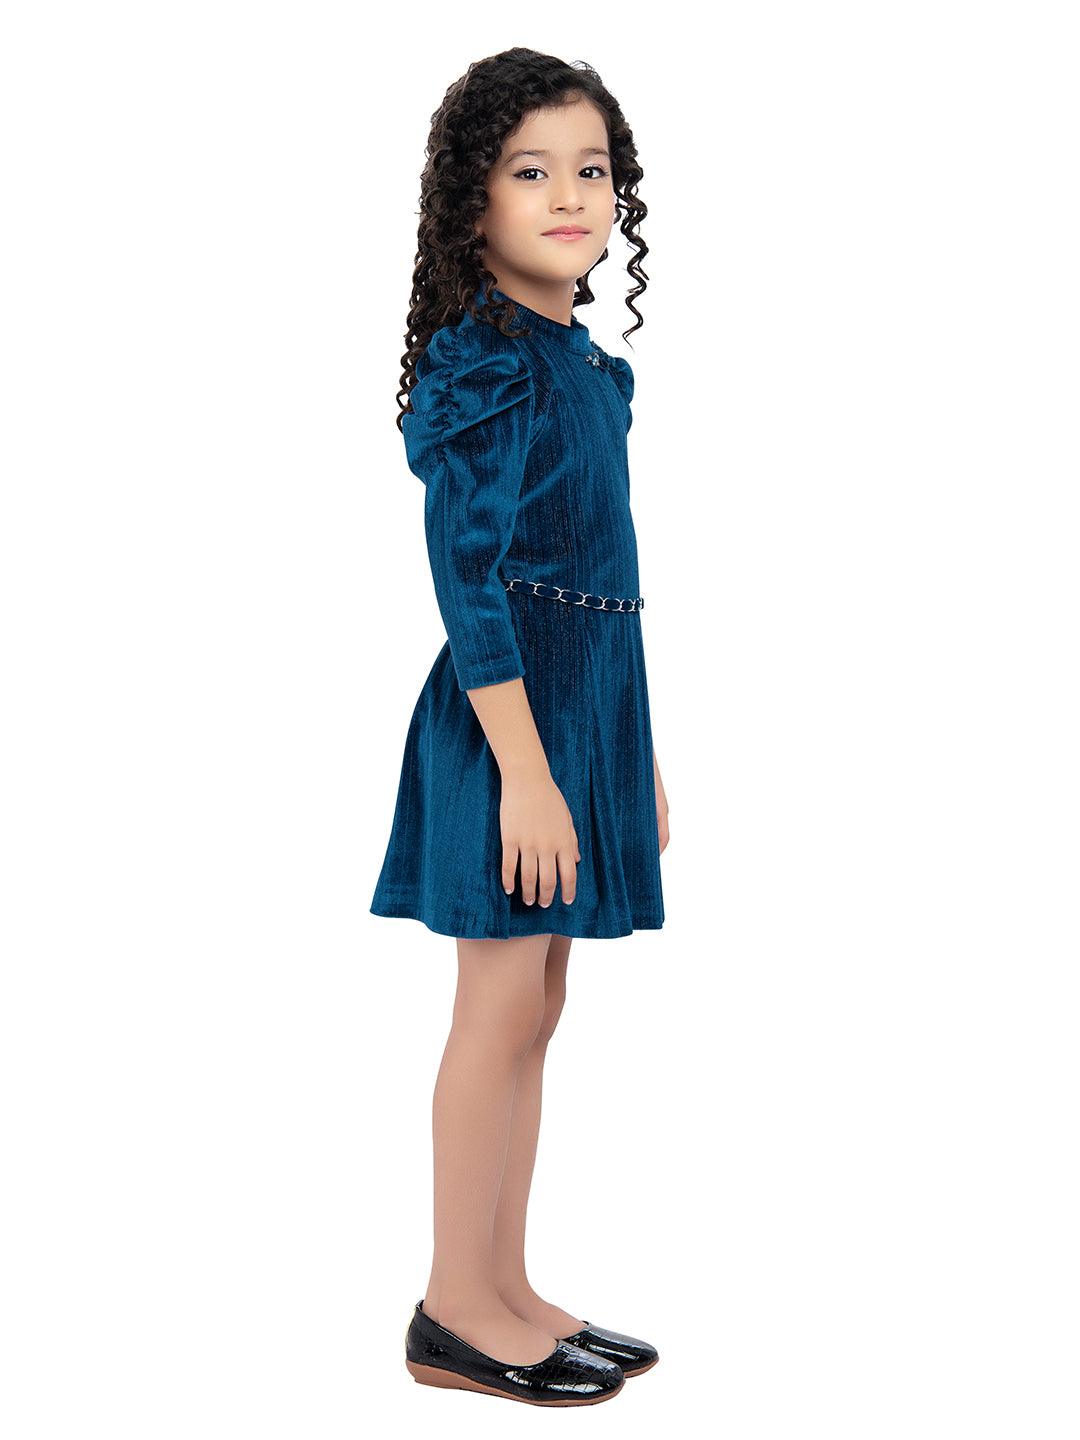 Tiny Baby Blue Colored Dress - 2135 Blue - TINY BABY INDIA shop.tinybaby.in